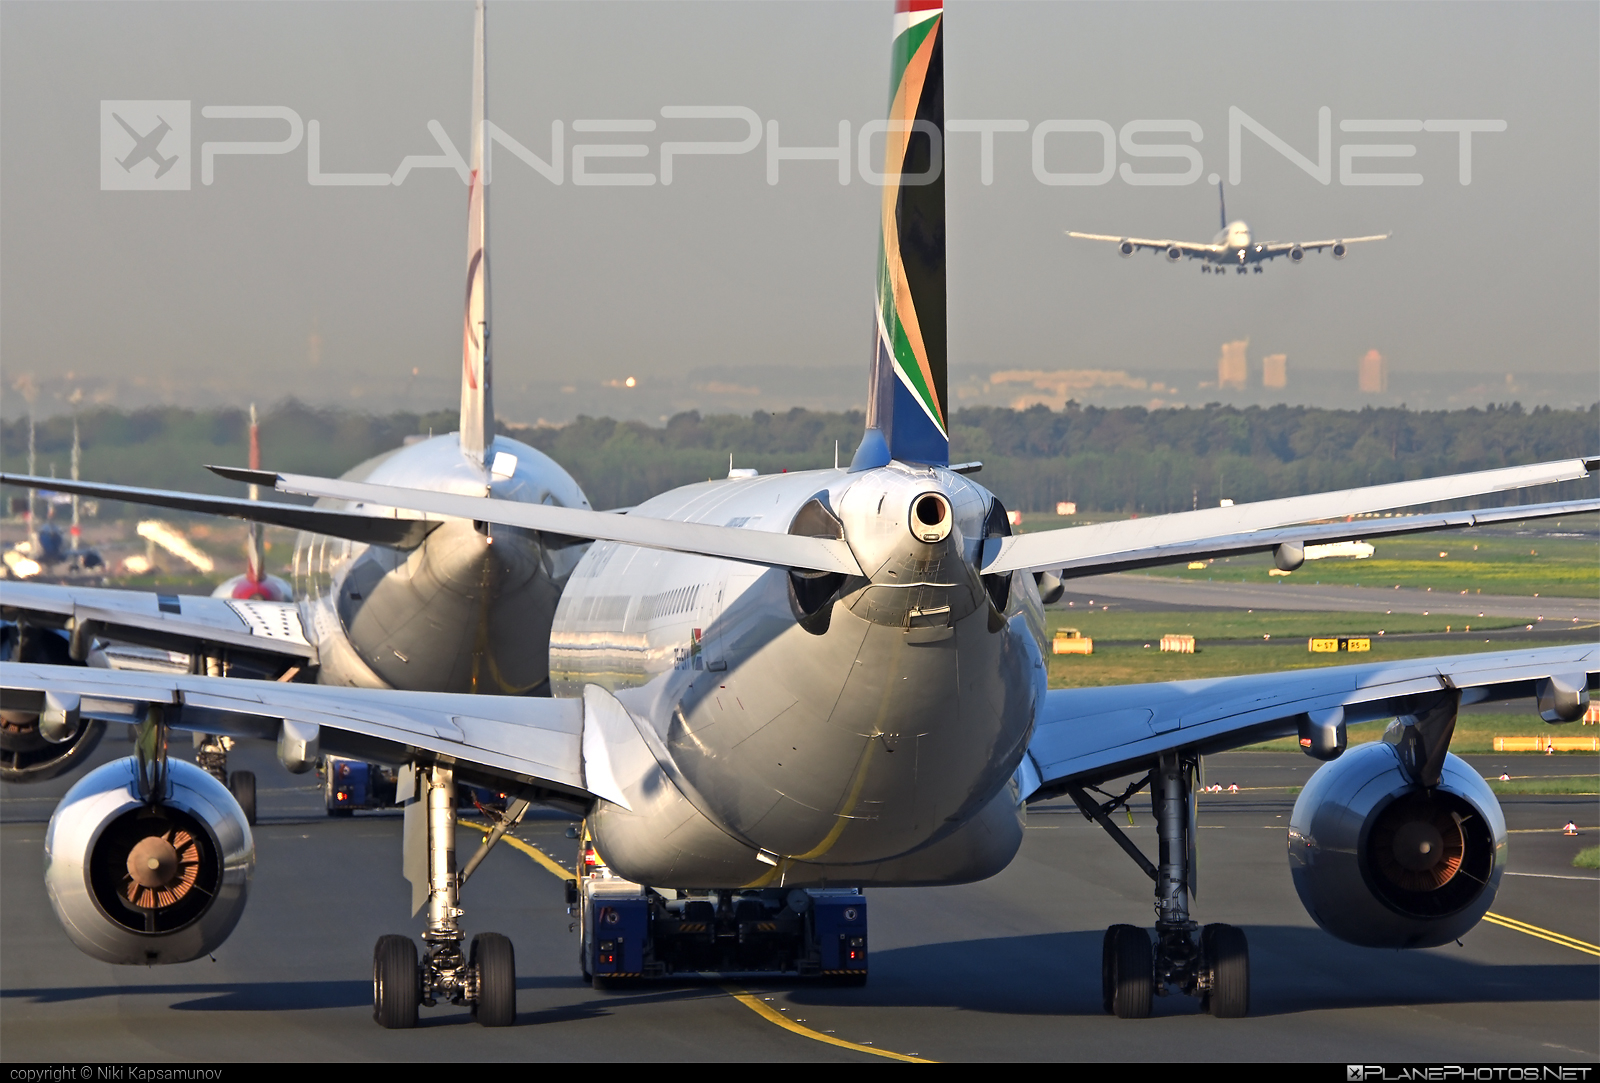 Airbus A330-243 - ZS-SXY operated by South African Airways #a330 #a330family #airbus #airbus330